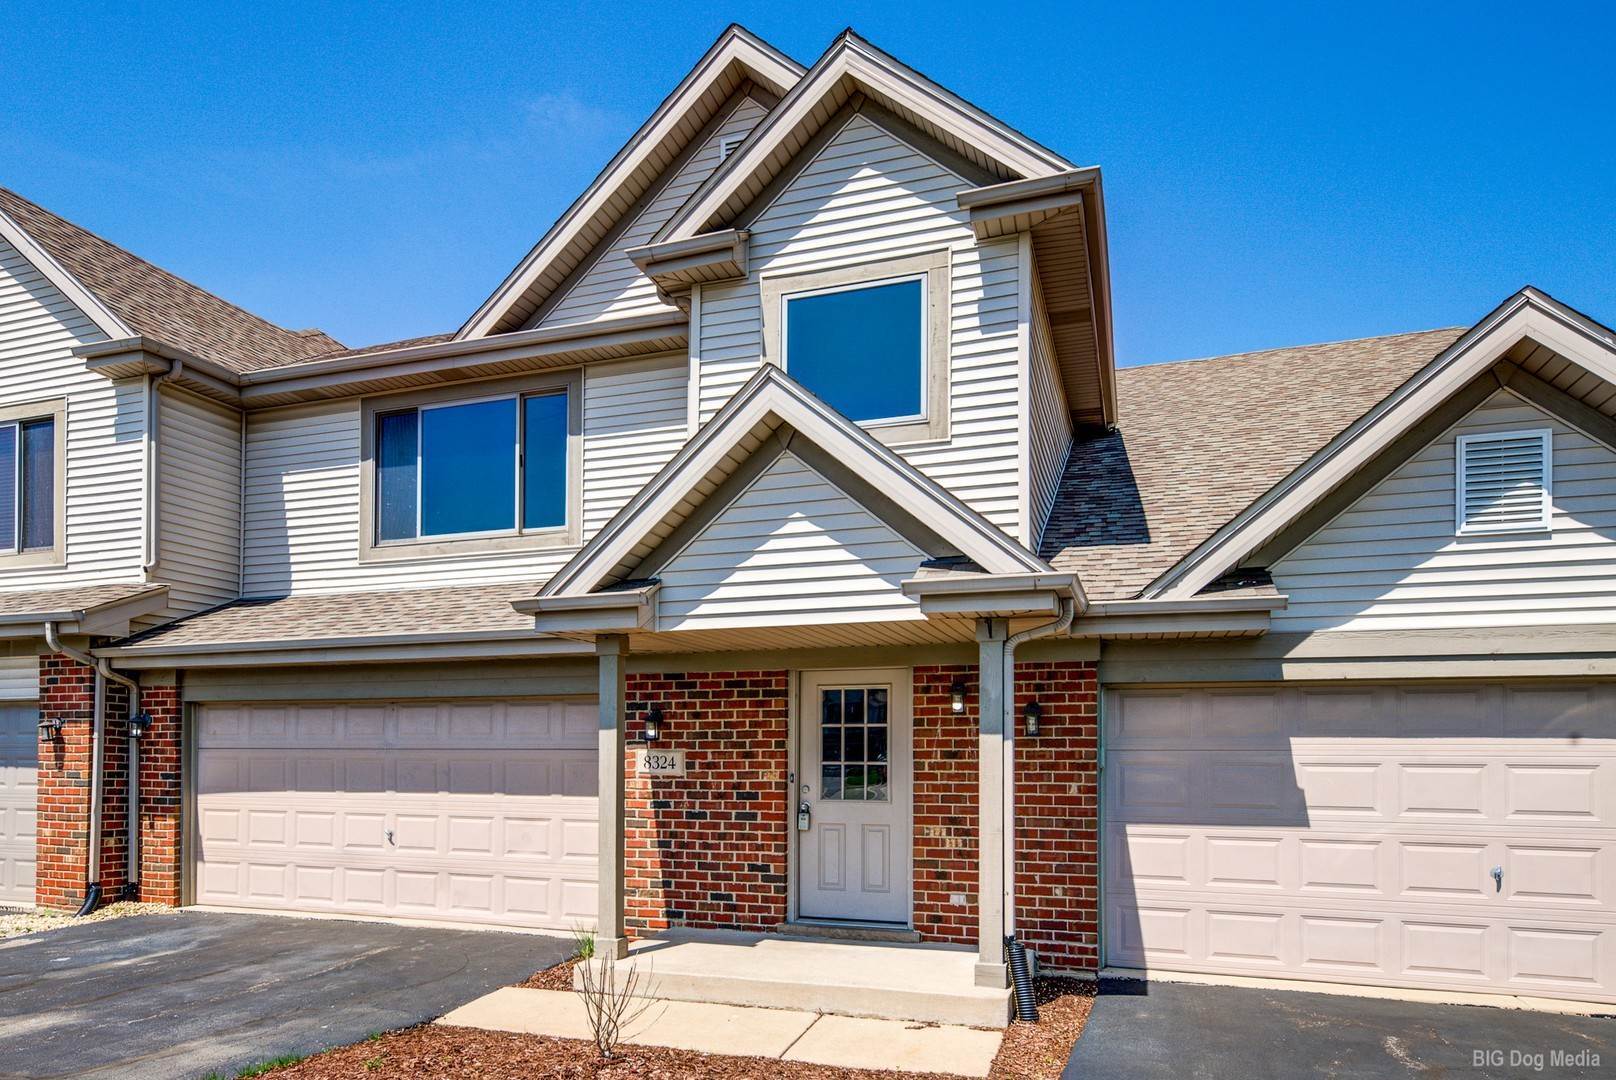 Townhouse at Frankfort, IL 60423